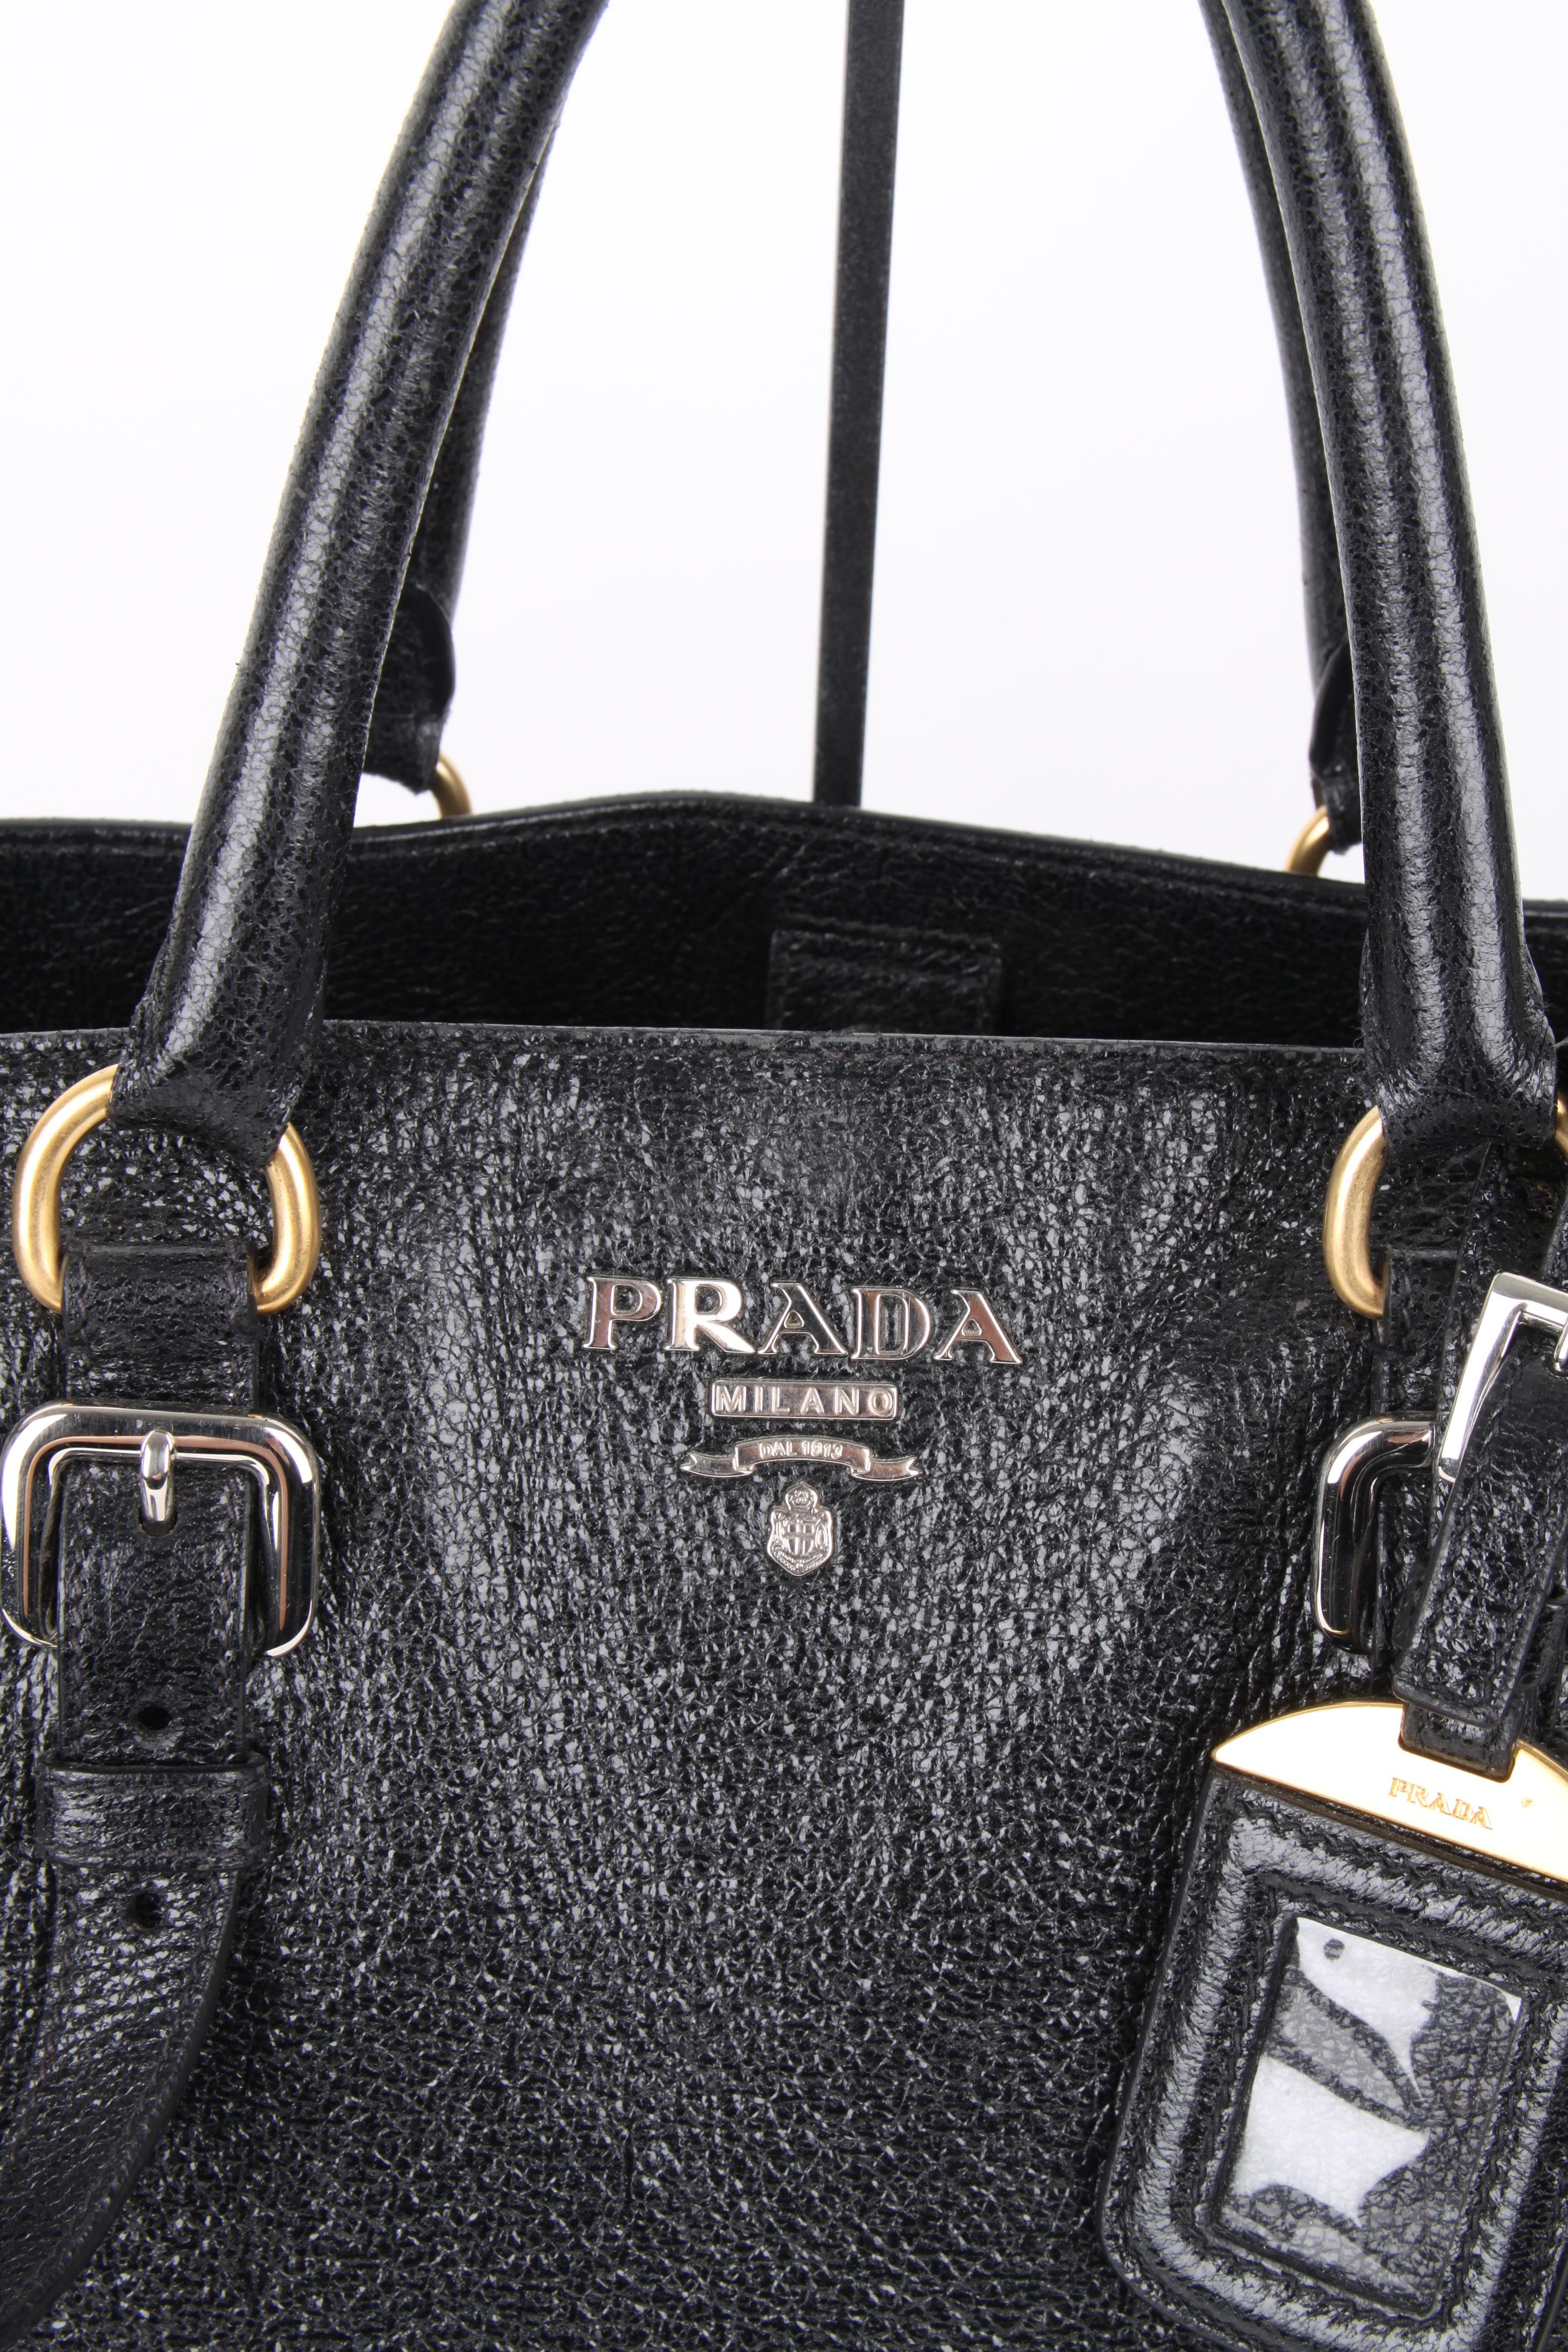 Prada Black Leather Crossbody Phenix Shopper Tote In Excellent Condition For Sale In Baarn, NL